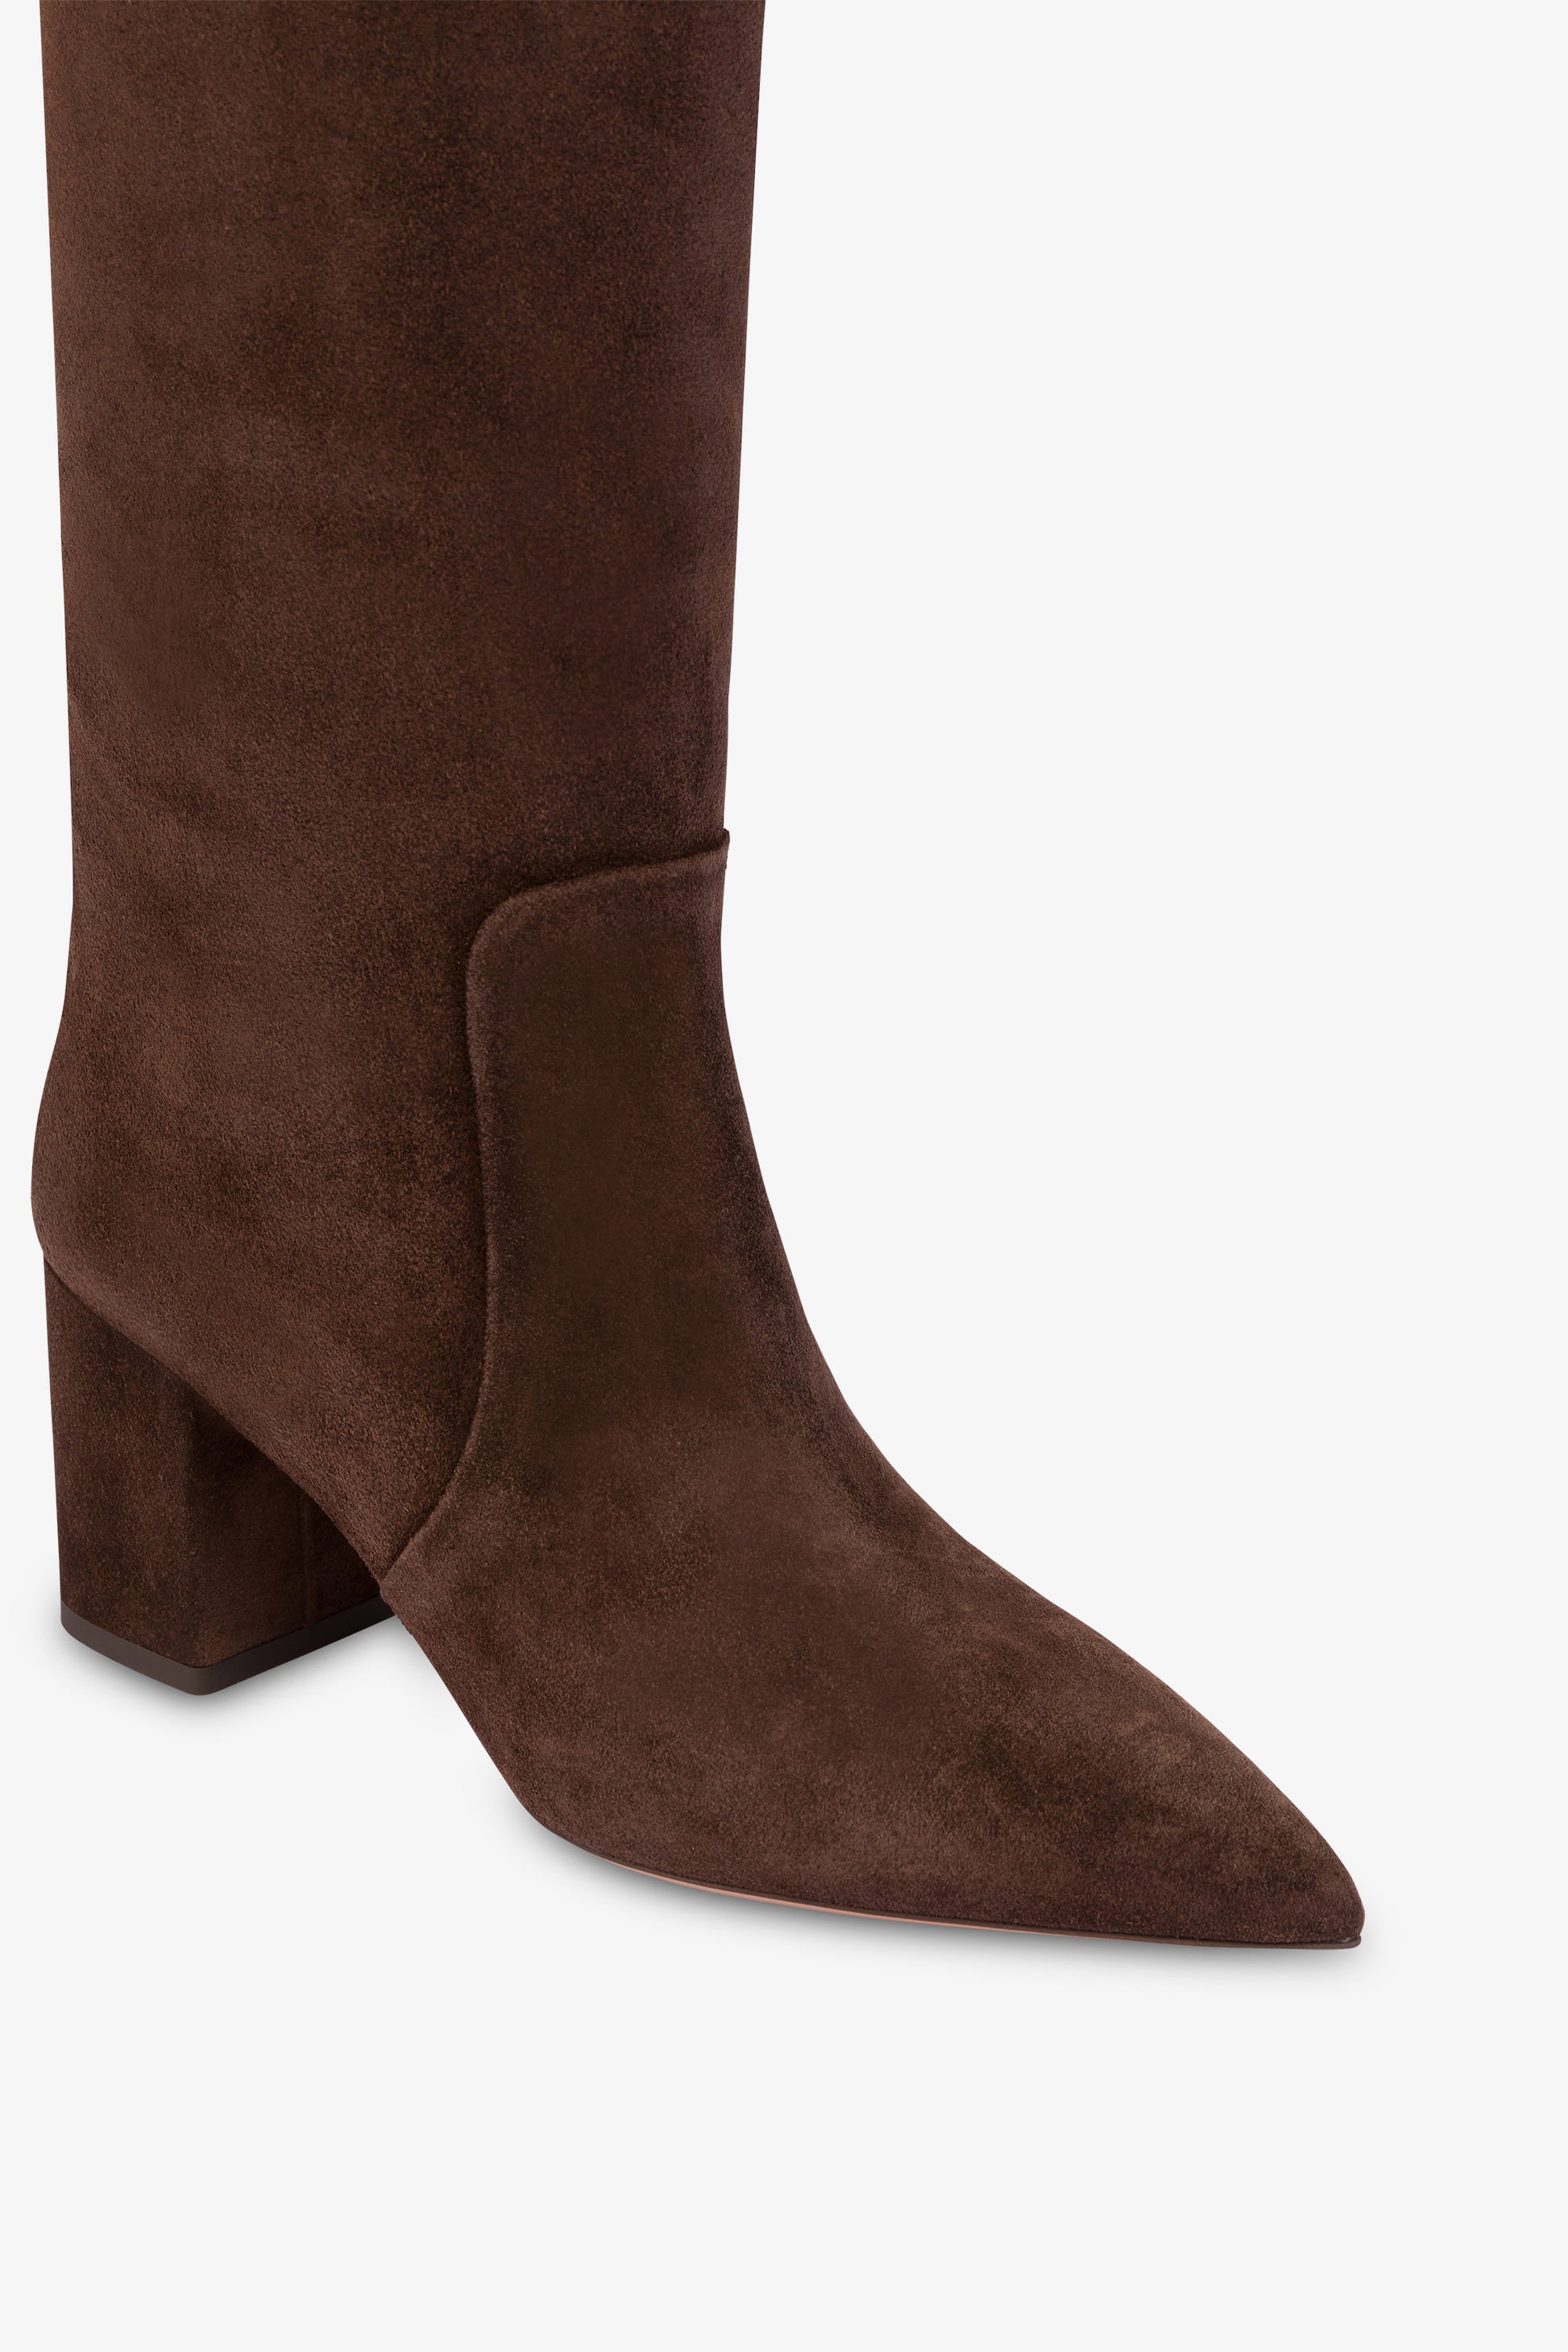 Knee-high boots in soft pepper suede leather